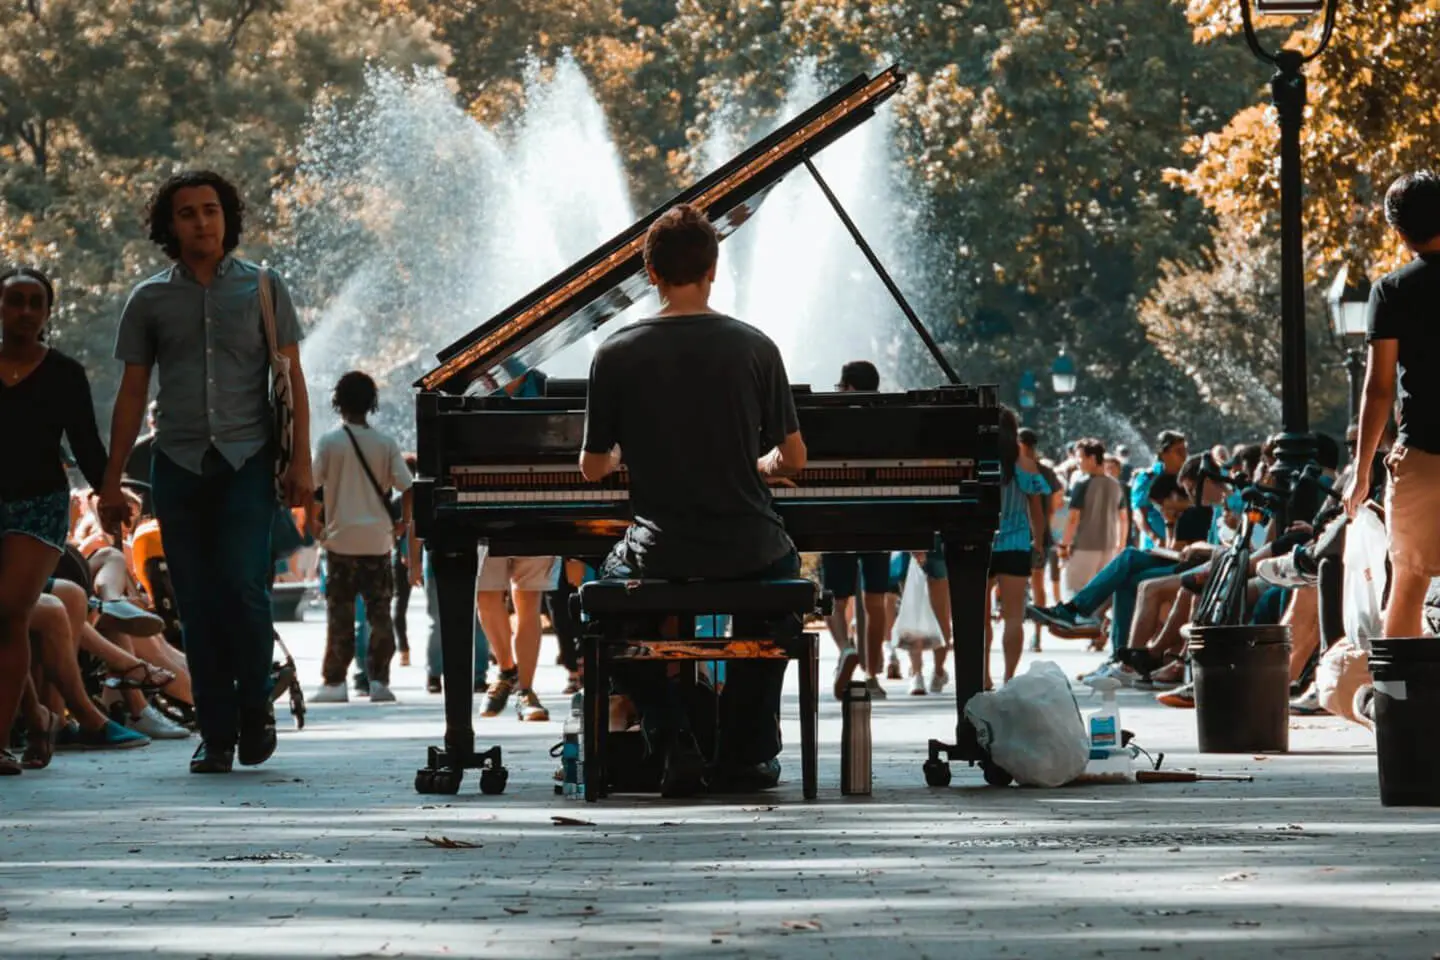 Man playing piano outdoors in a Manhattan park with onlookers in the background.